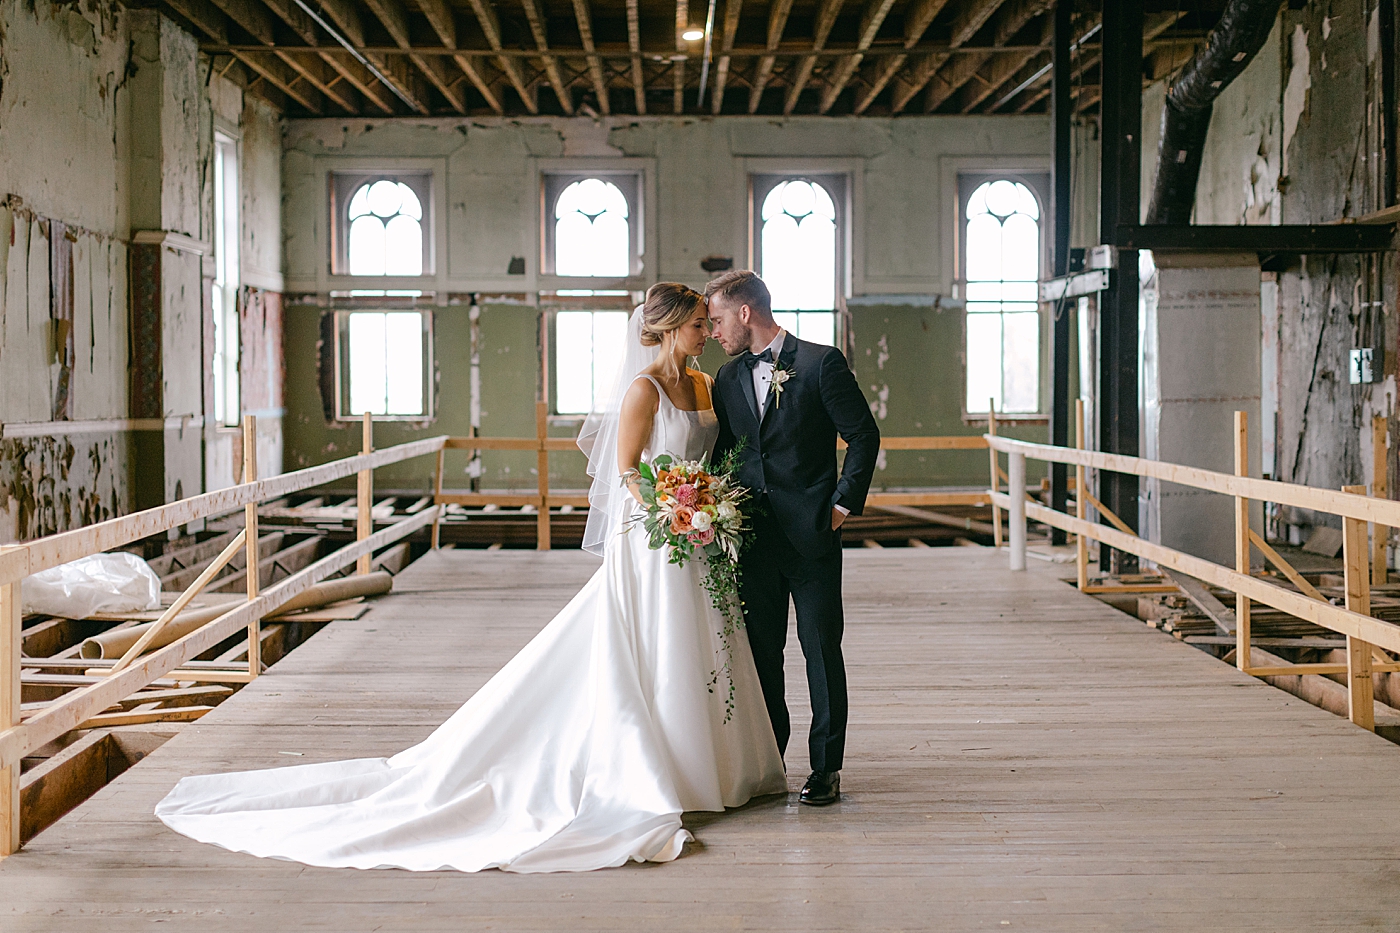 Bride and groom with their foreheads together in an industrial building | Excelsior PA Wedding Photography by Hope Helmuth Photography